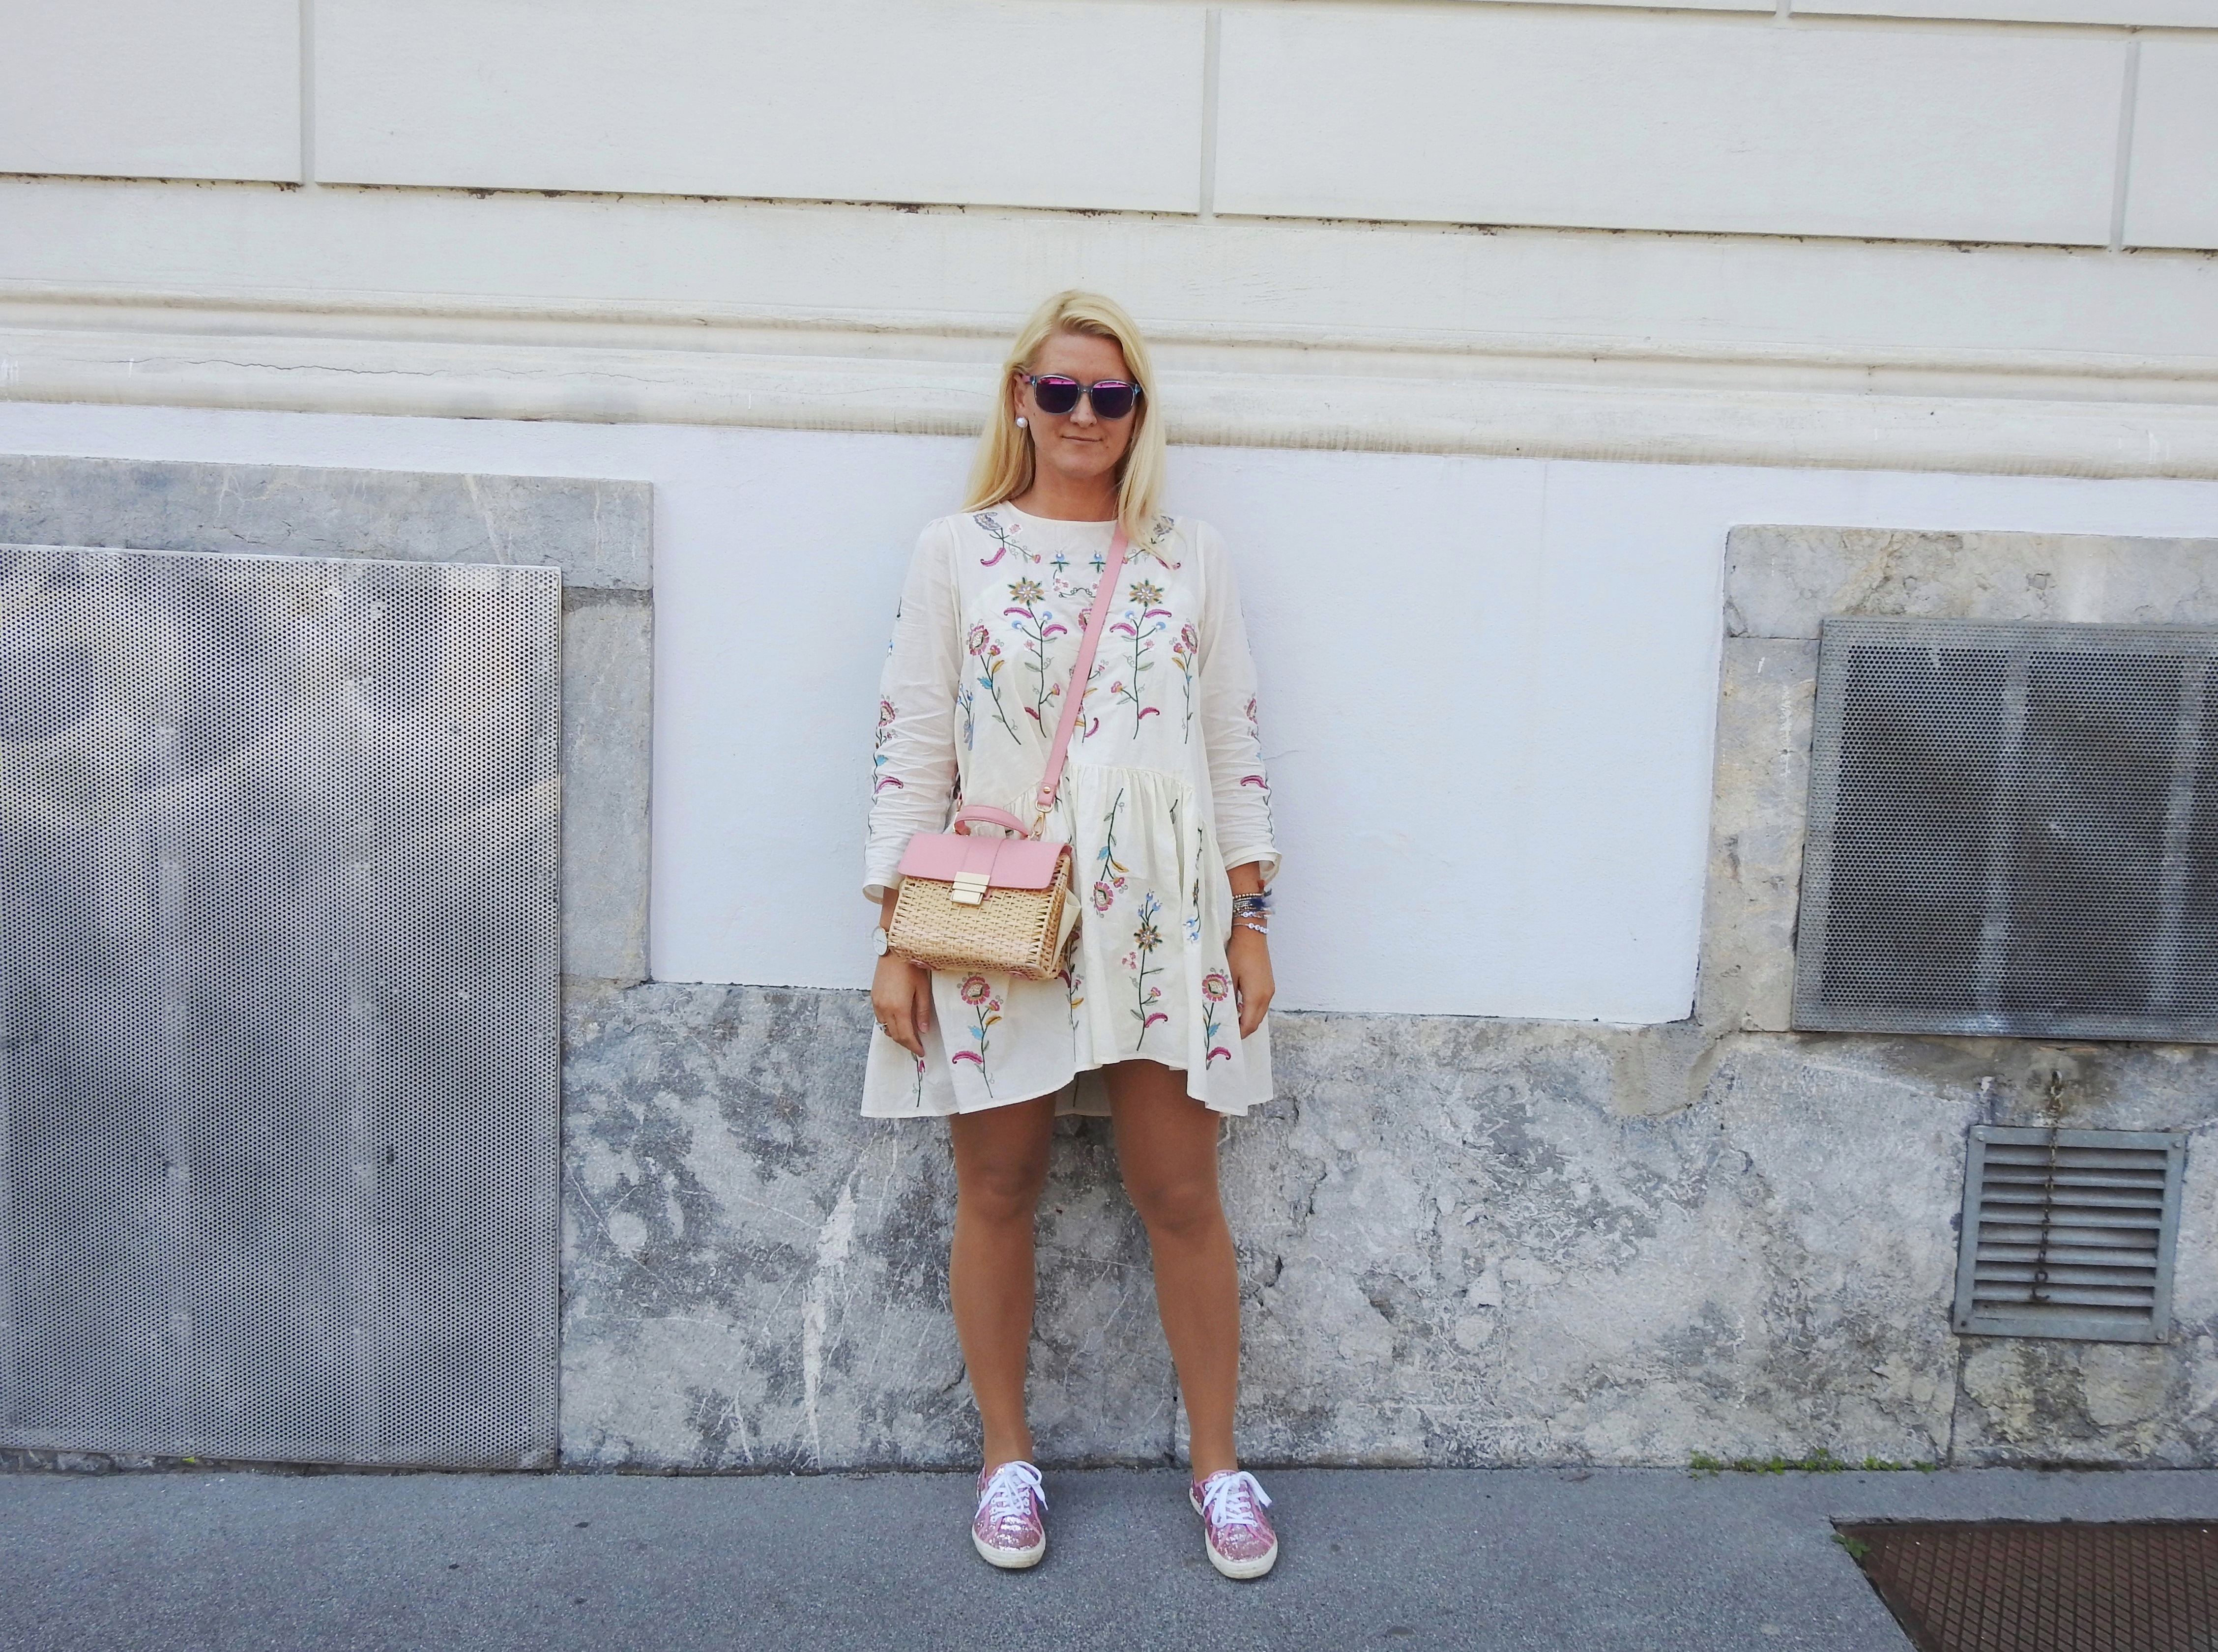 Embroidered-White-Floral-Print-Dress-Superga-Glitter-Sneakers-carrieslifestyle-Tamara-Prutsch